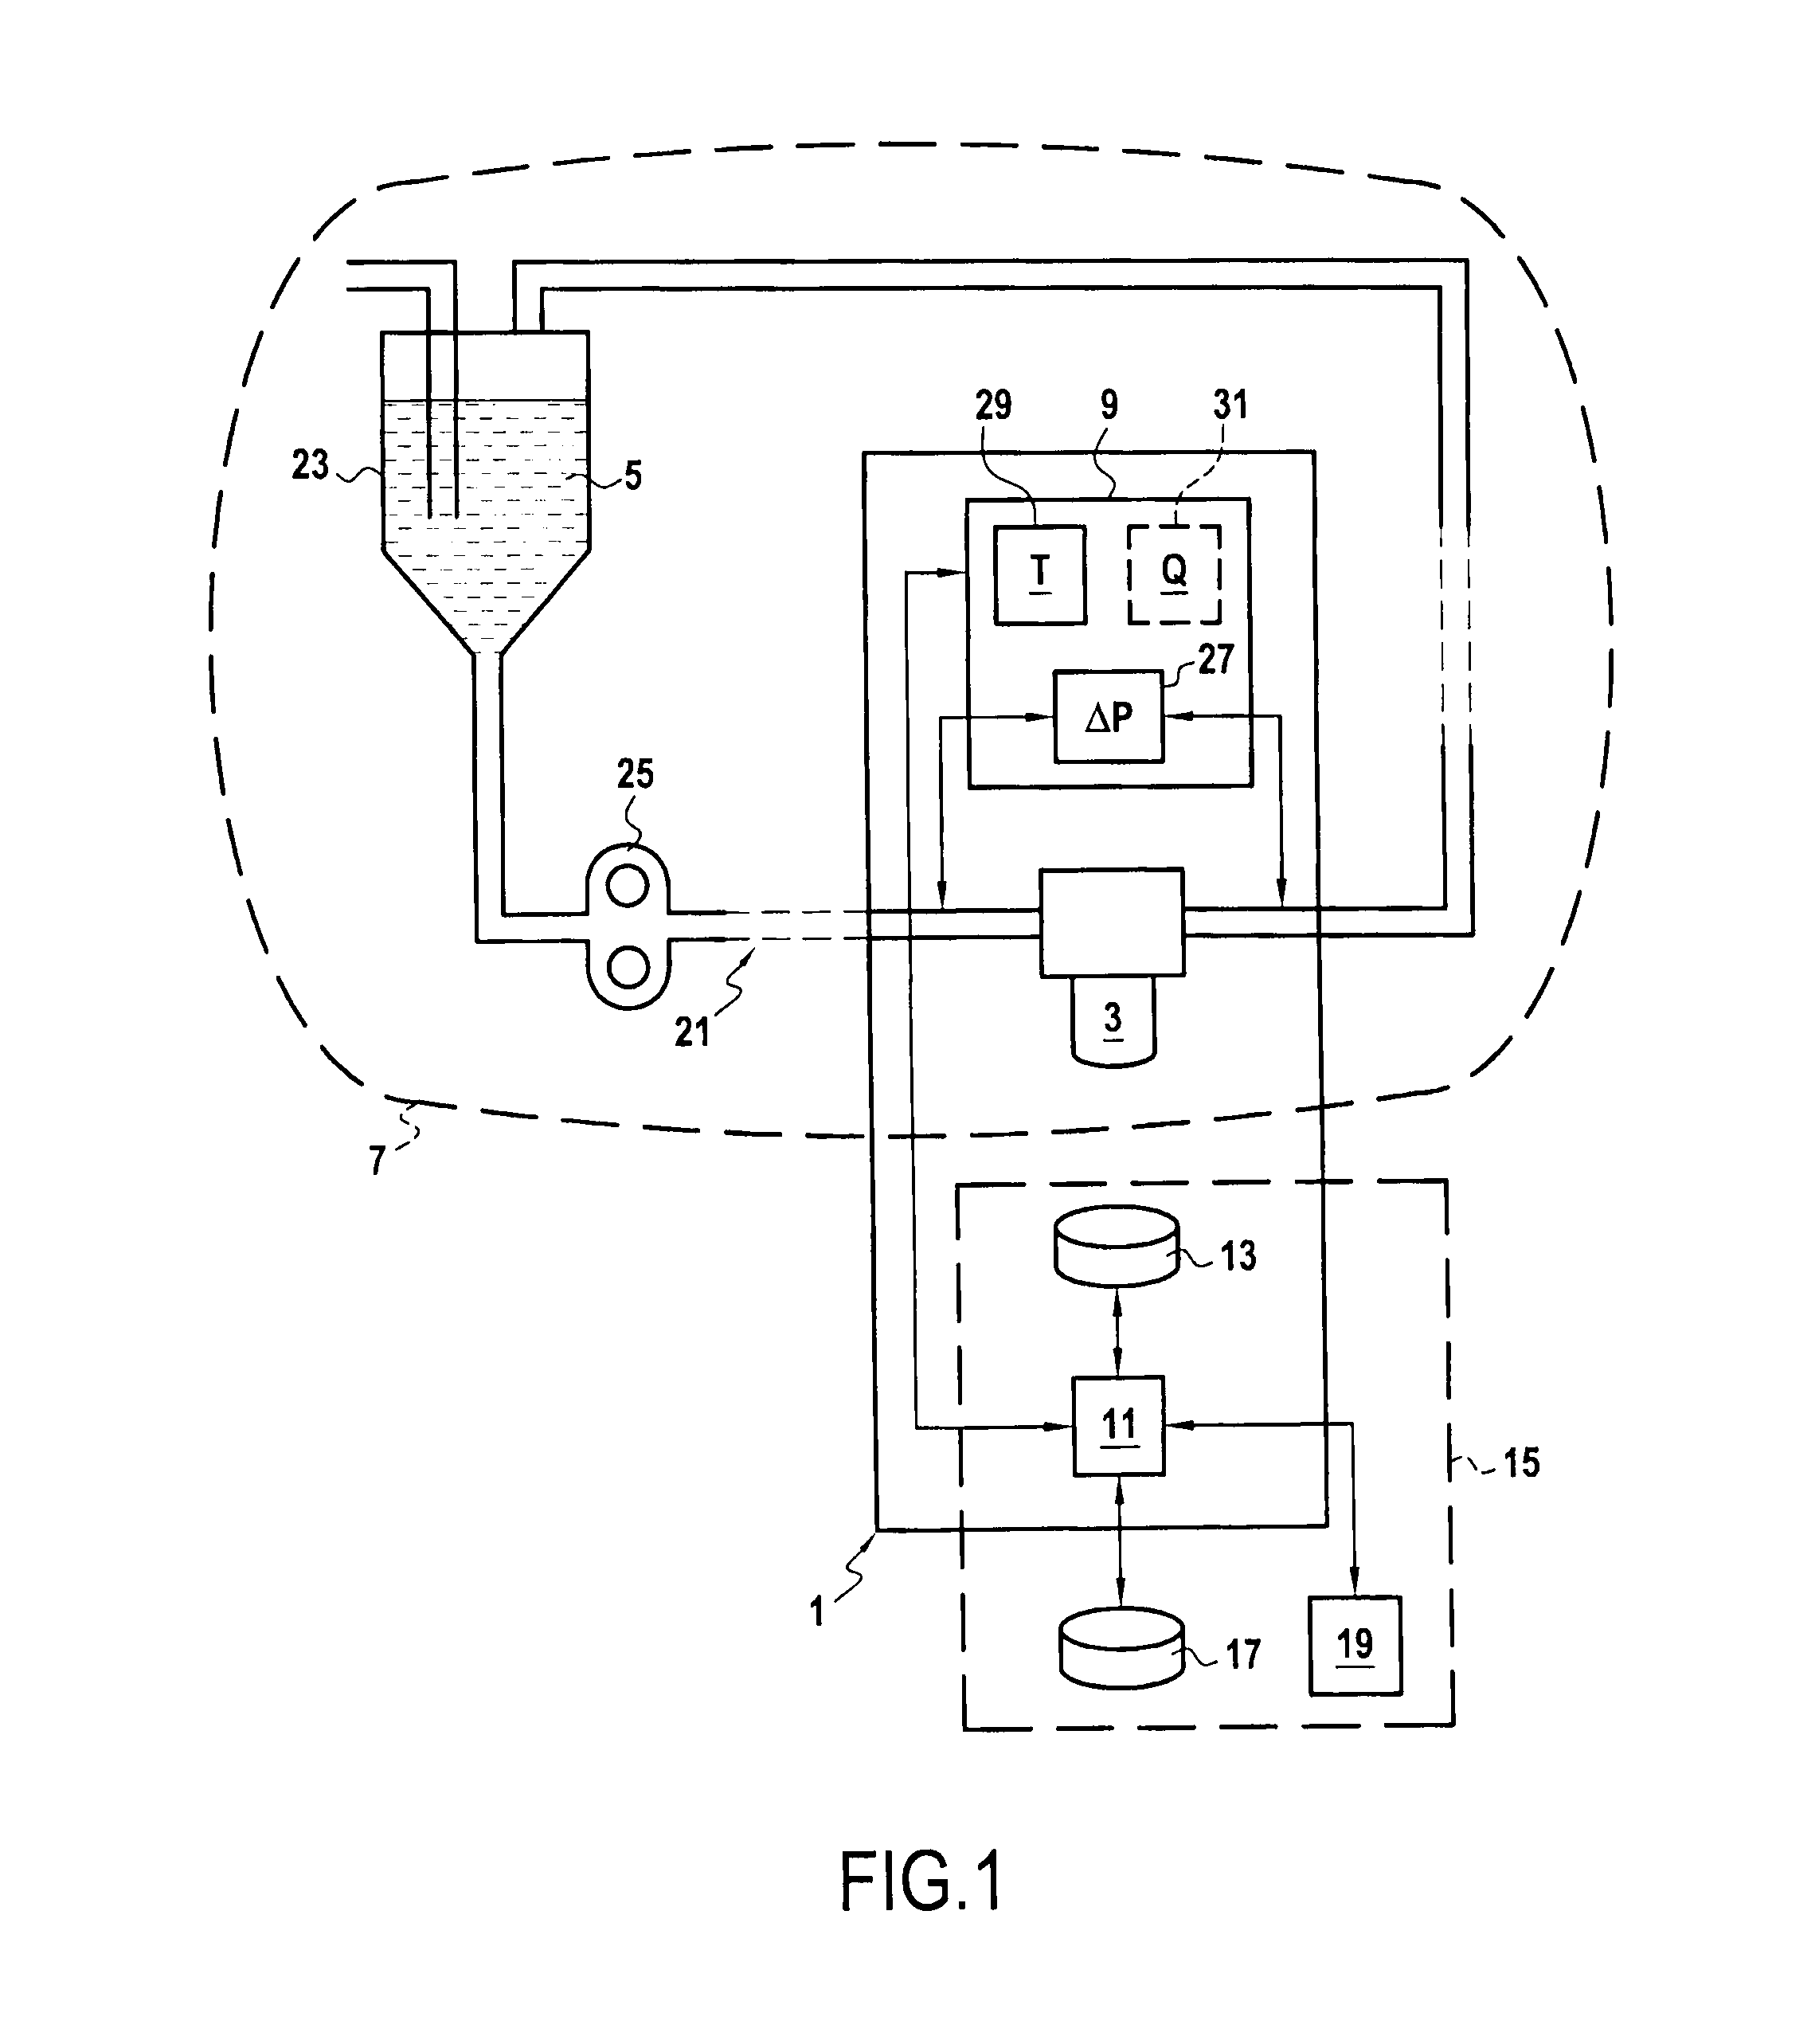 Monitoring a filter used for filtering a fluid in an aircraft engine